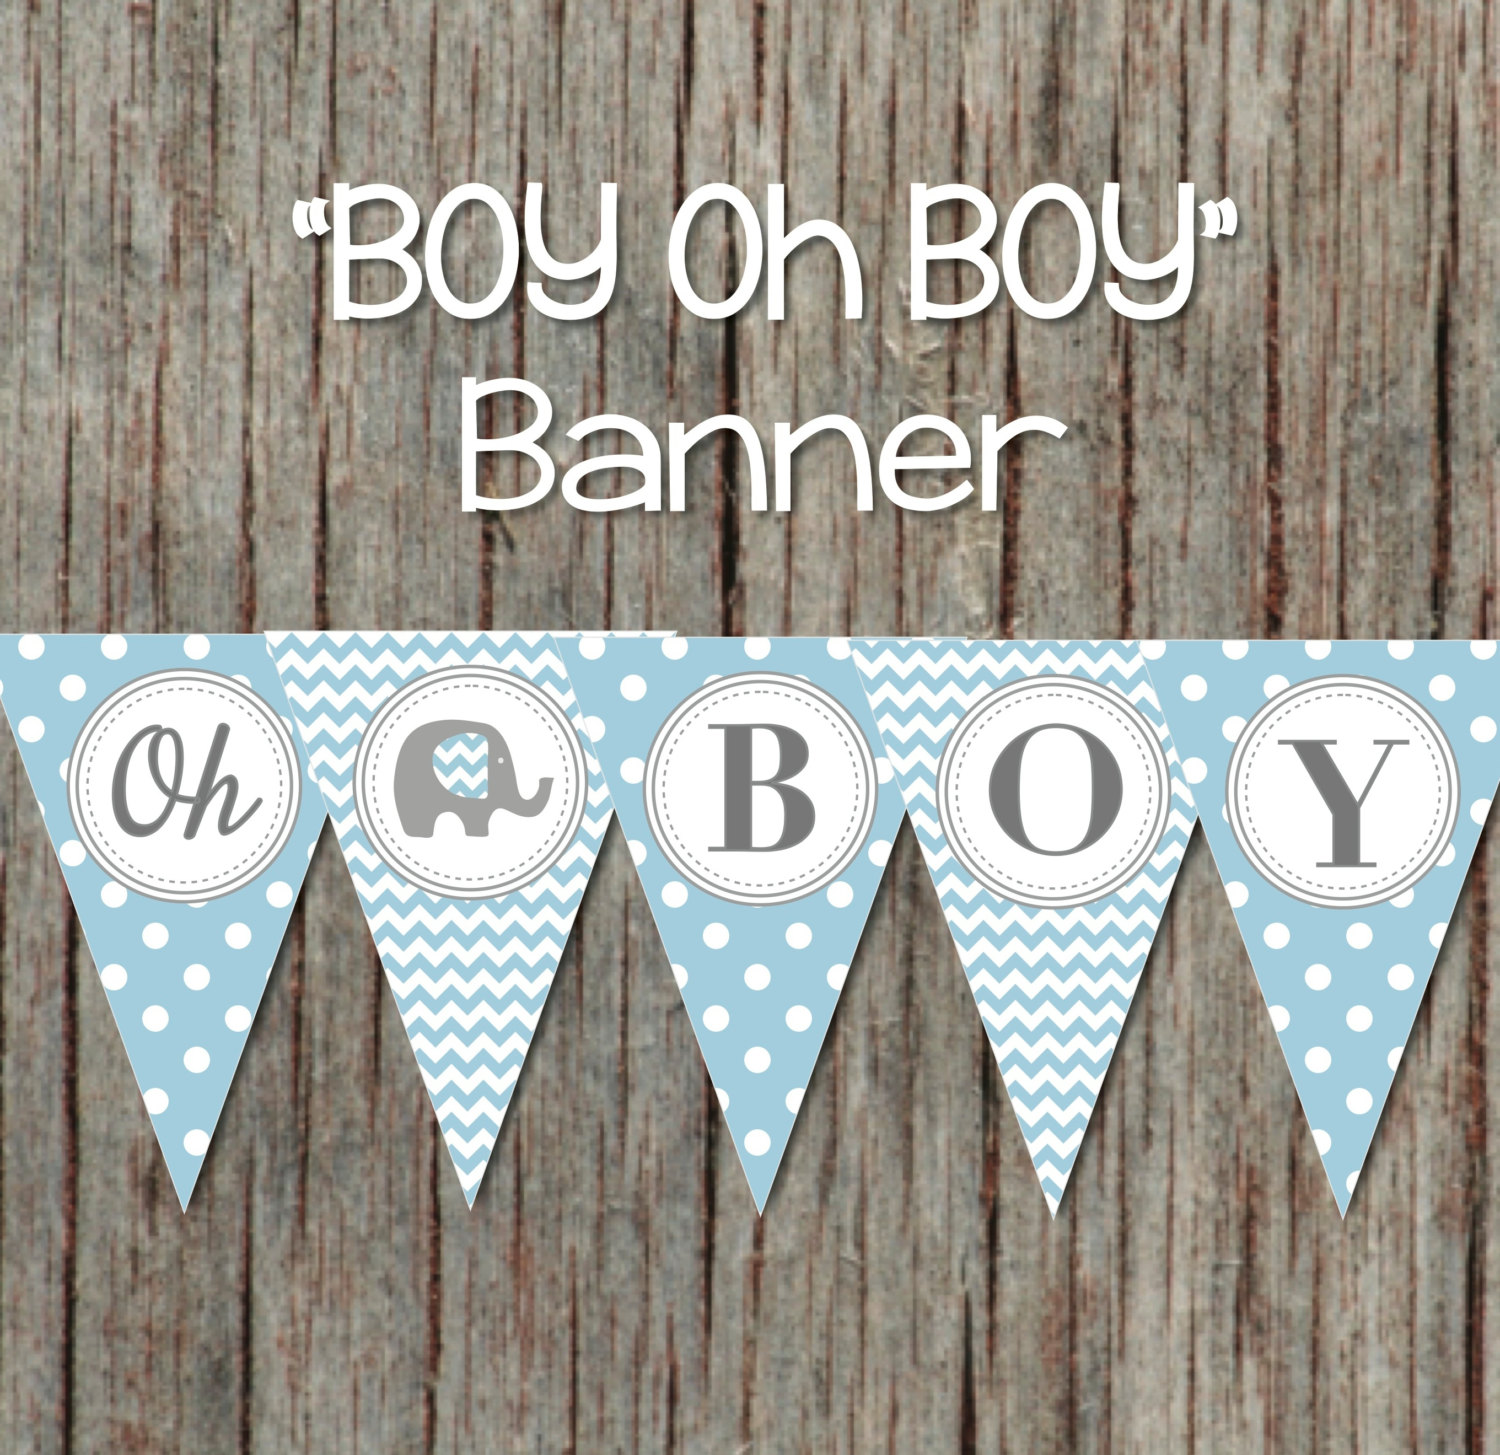 Full Size of Baby Shower:89+ Indulging Baby Shower Banner Picture Inspirations Baby Shower Banner Boy Oh Boy Printable Baby Shower By Bumpandbeyonddesigns On Zibbet